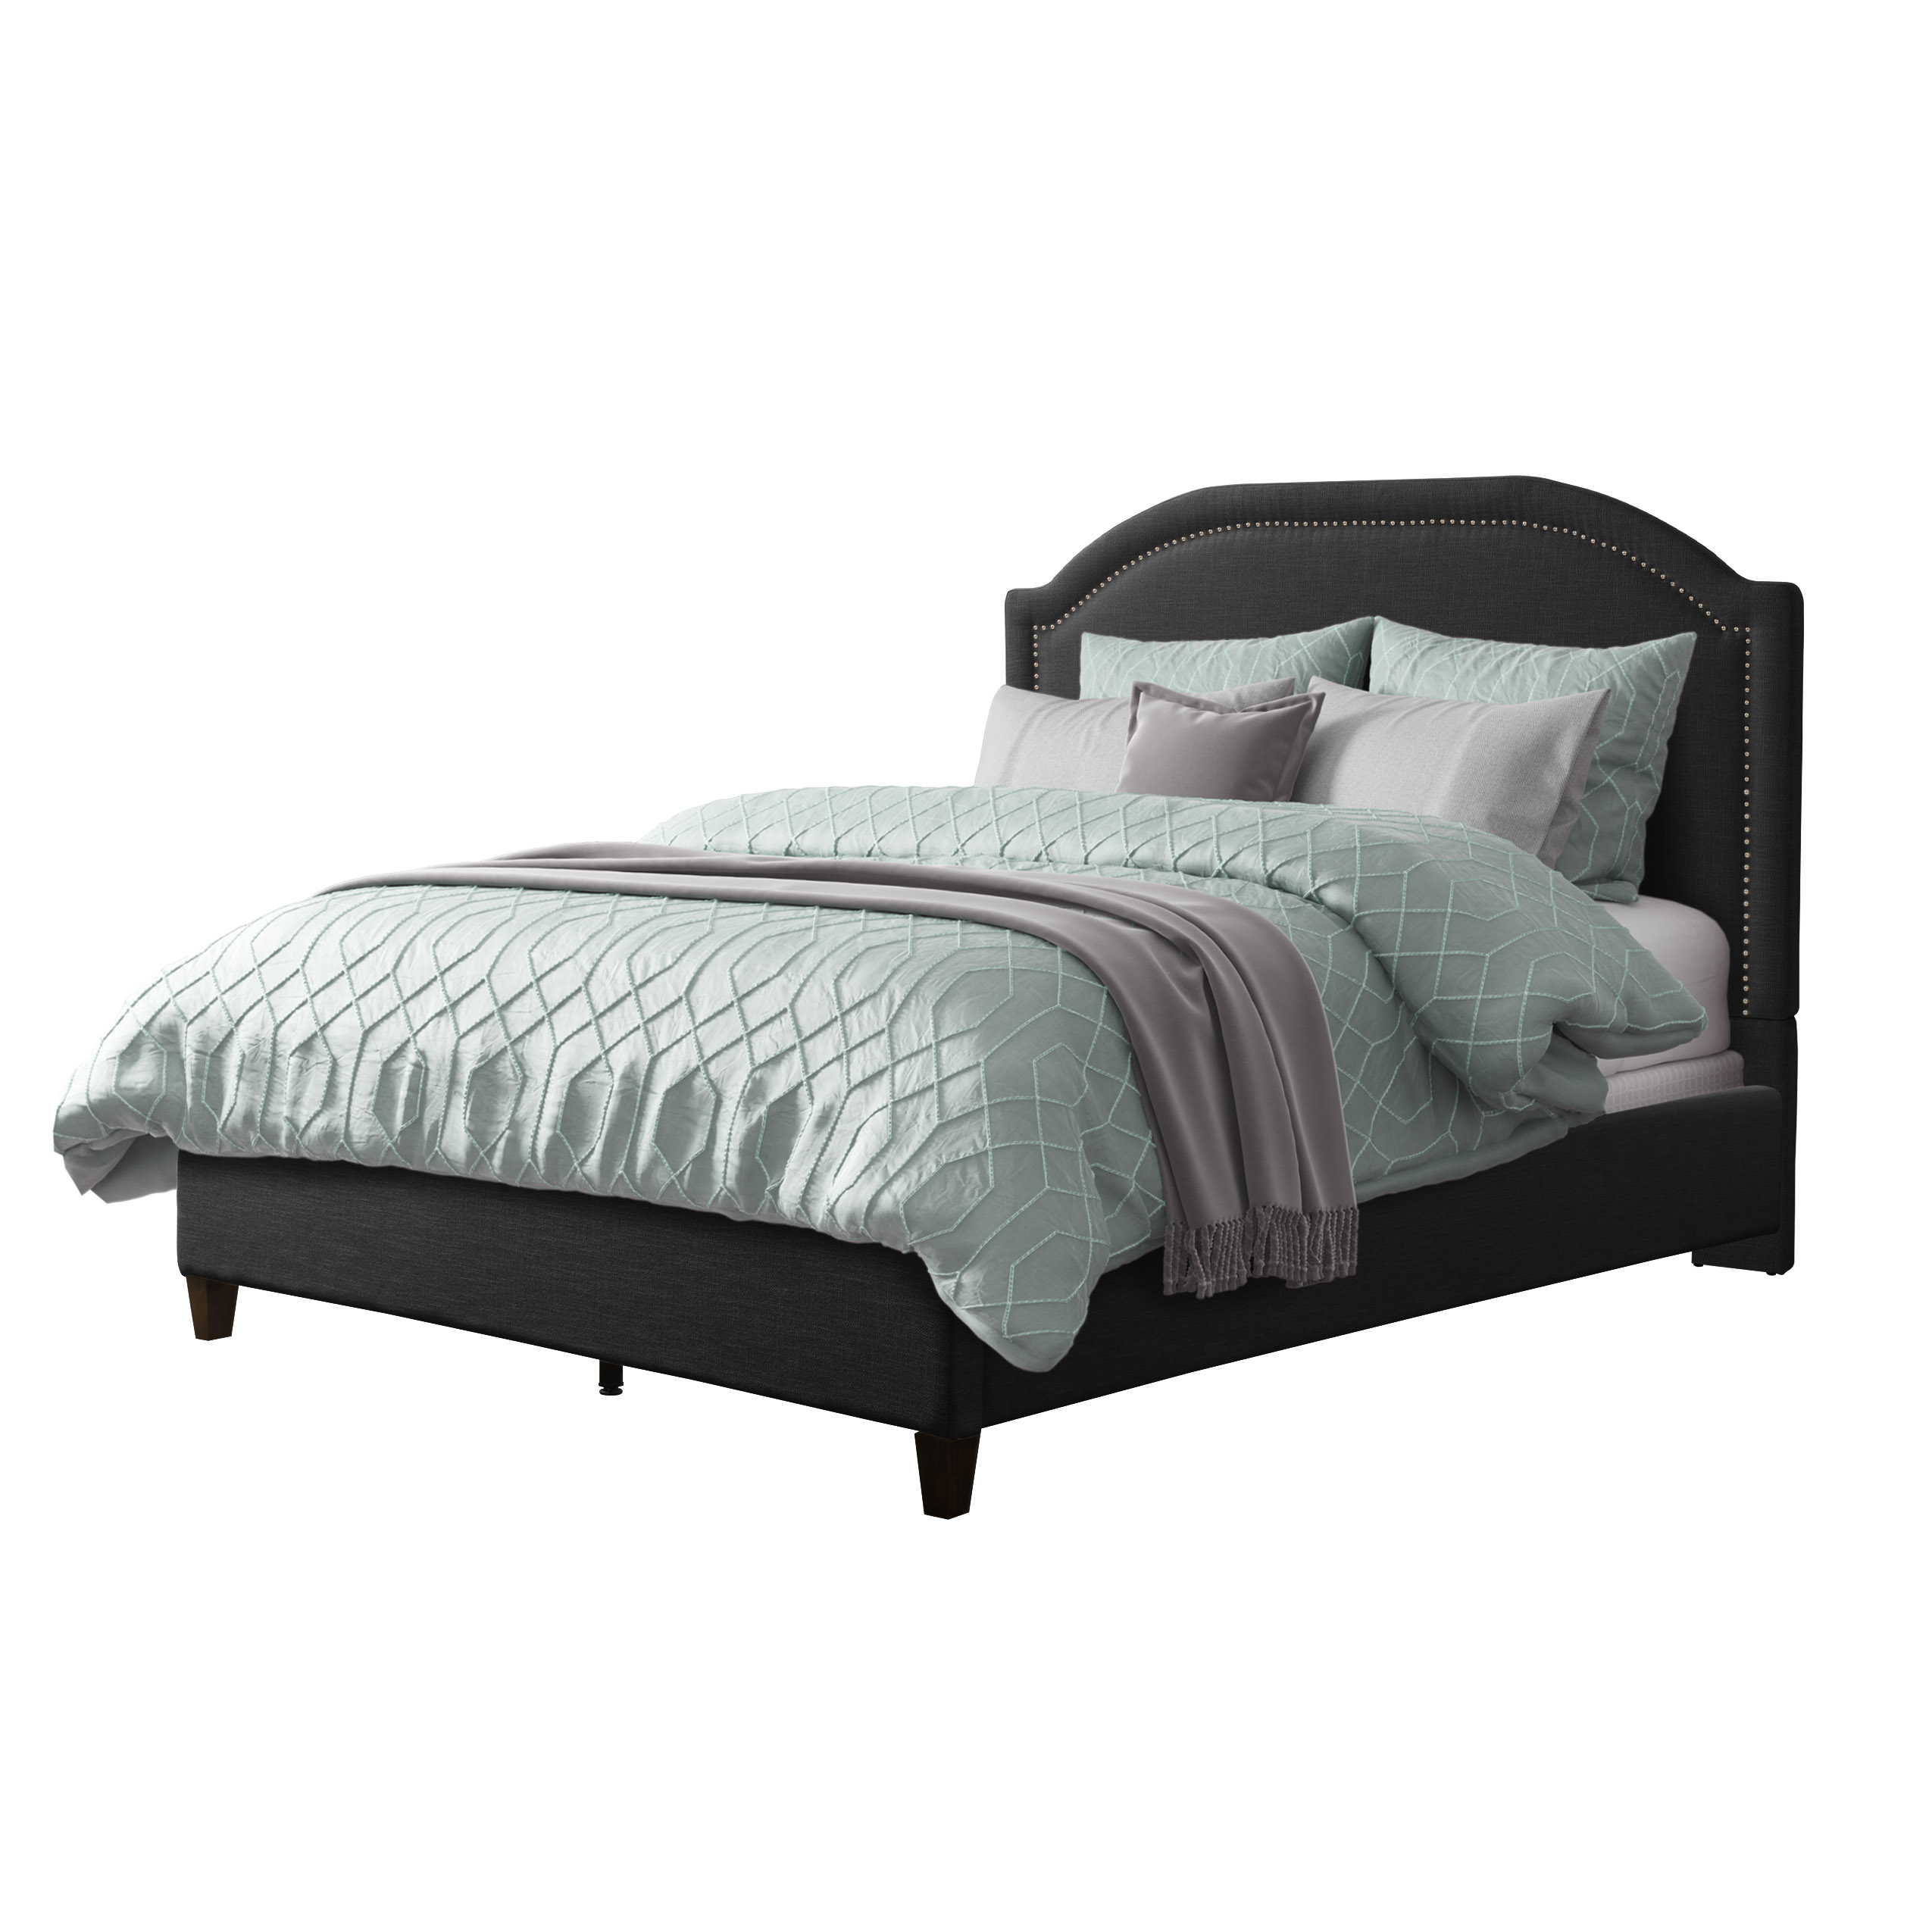 Dark Grey Fabric Double Bed Frame, Upholstered Double Bed Frame